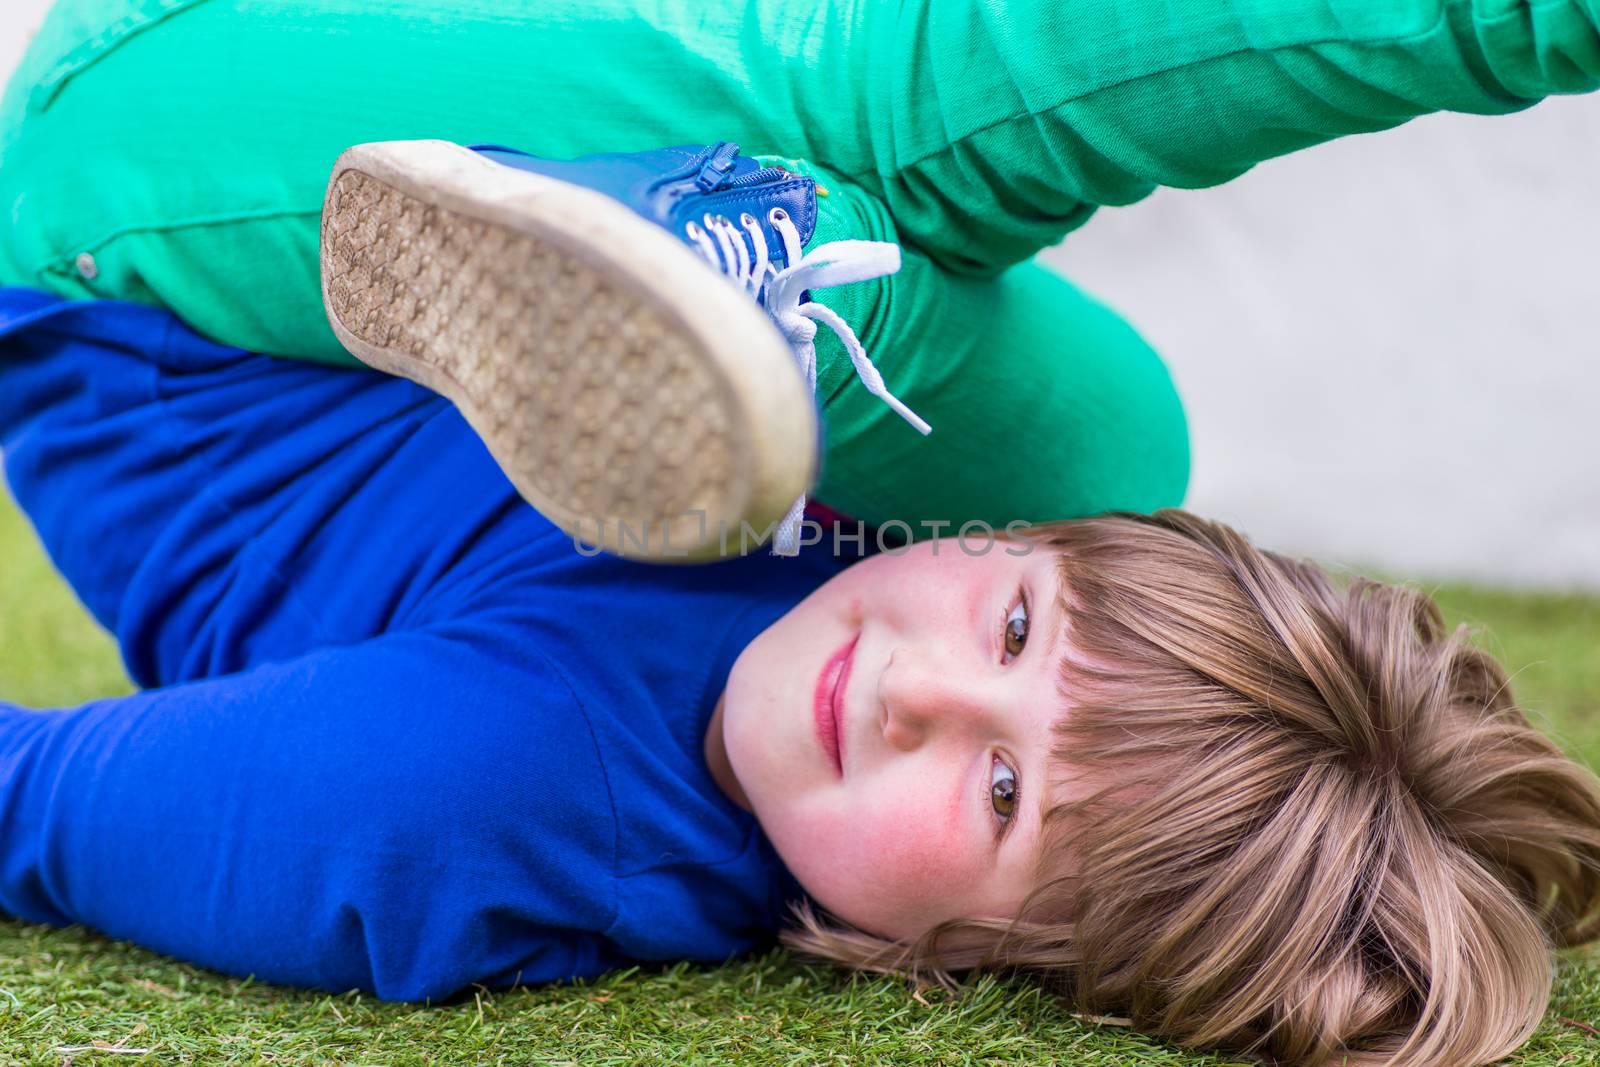 Bent european girl lying on her back on grass at playground